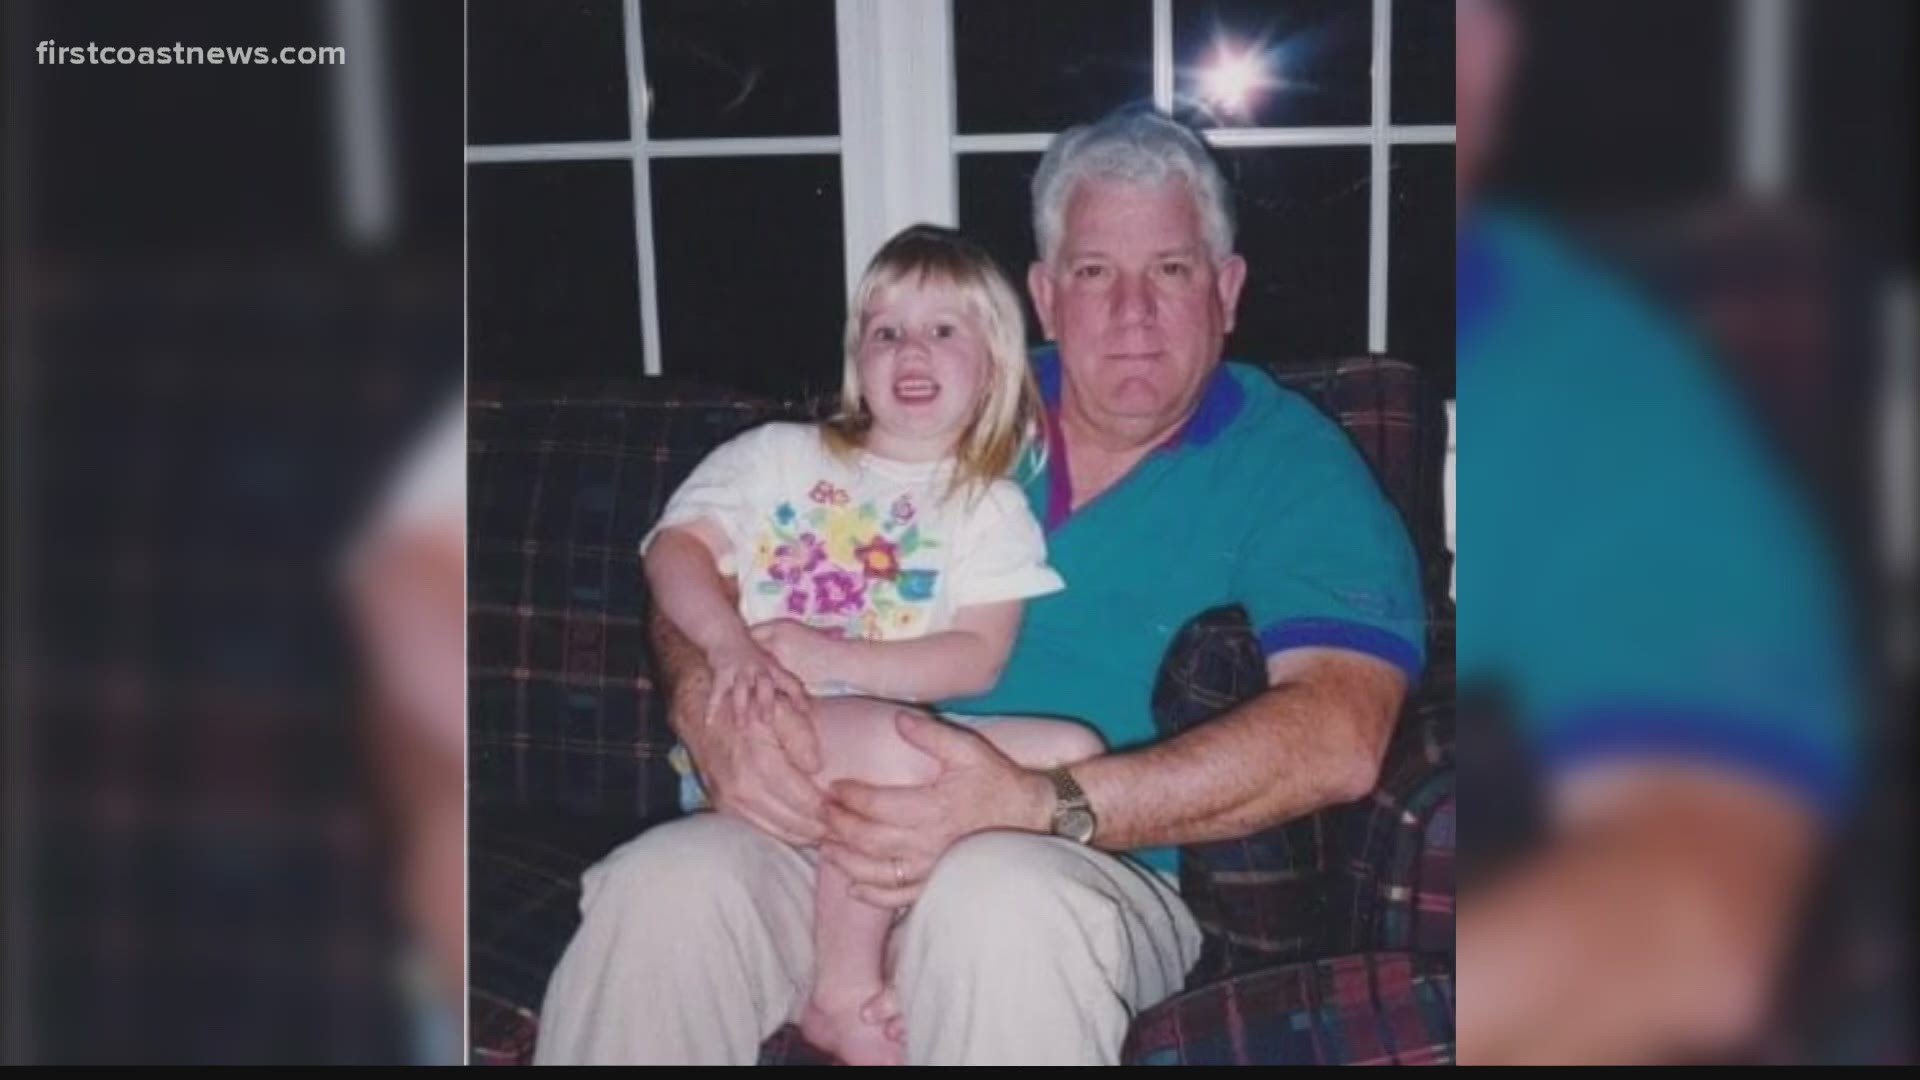 Jacksonville woman competing in ironman triathlon Sunday in honor of grandfathers